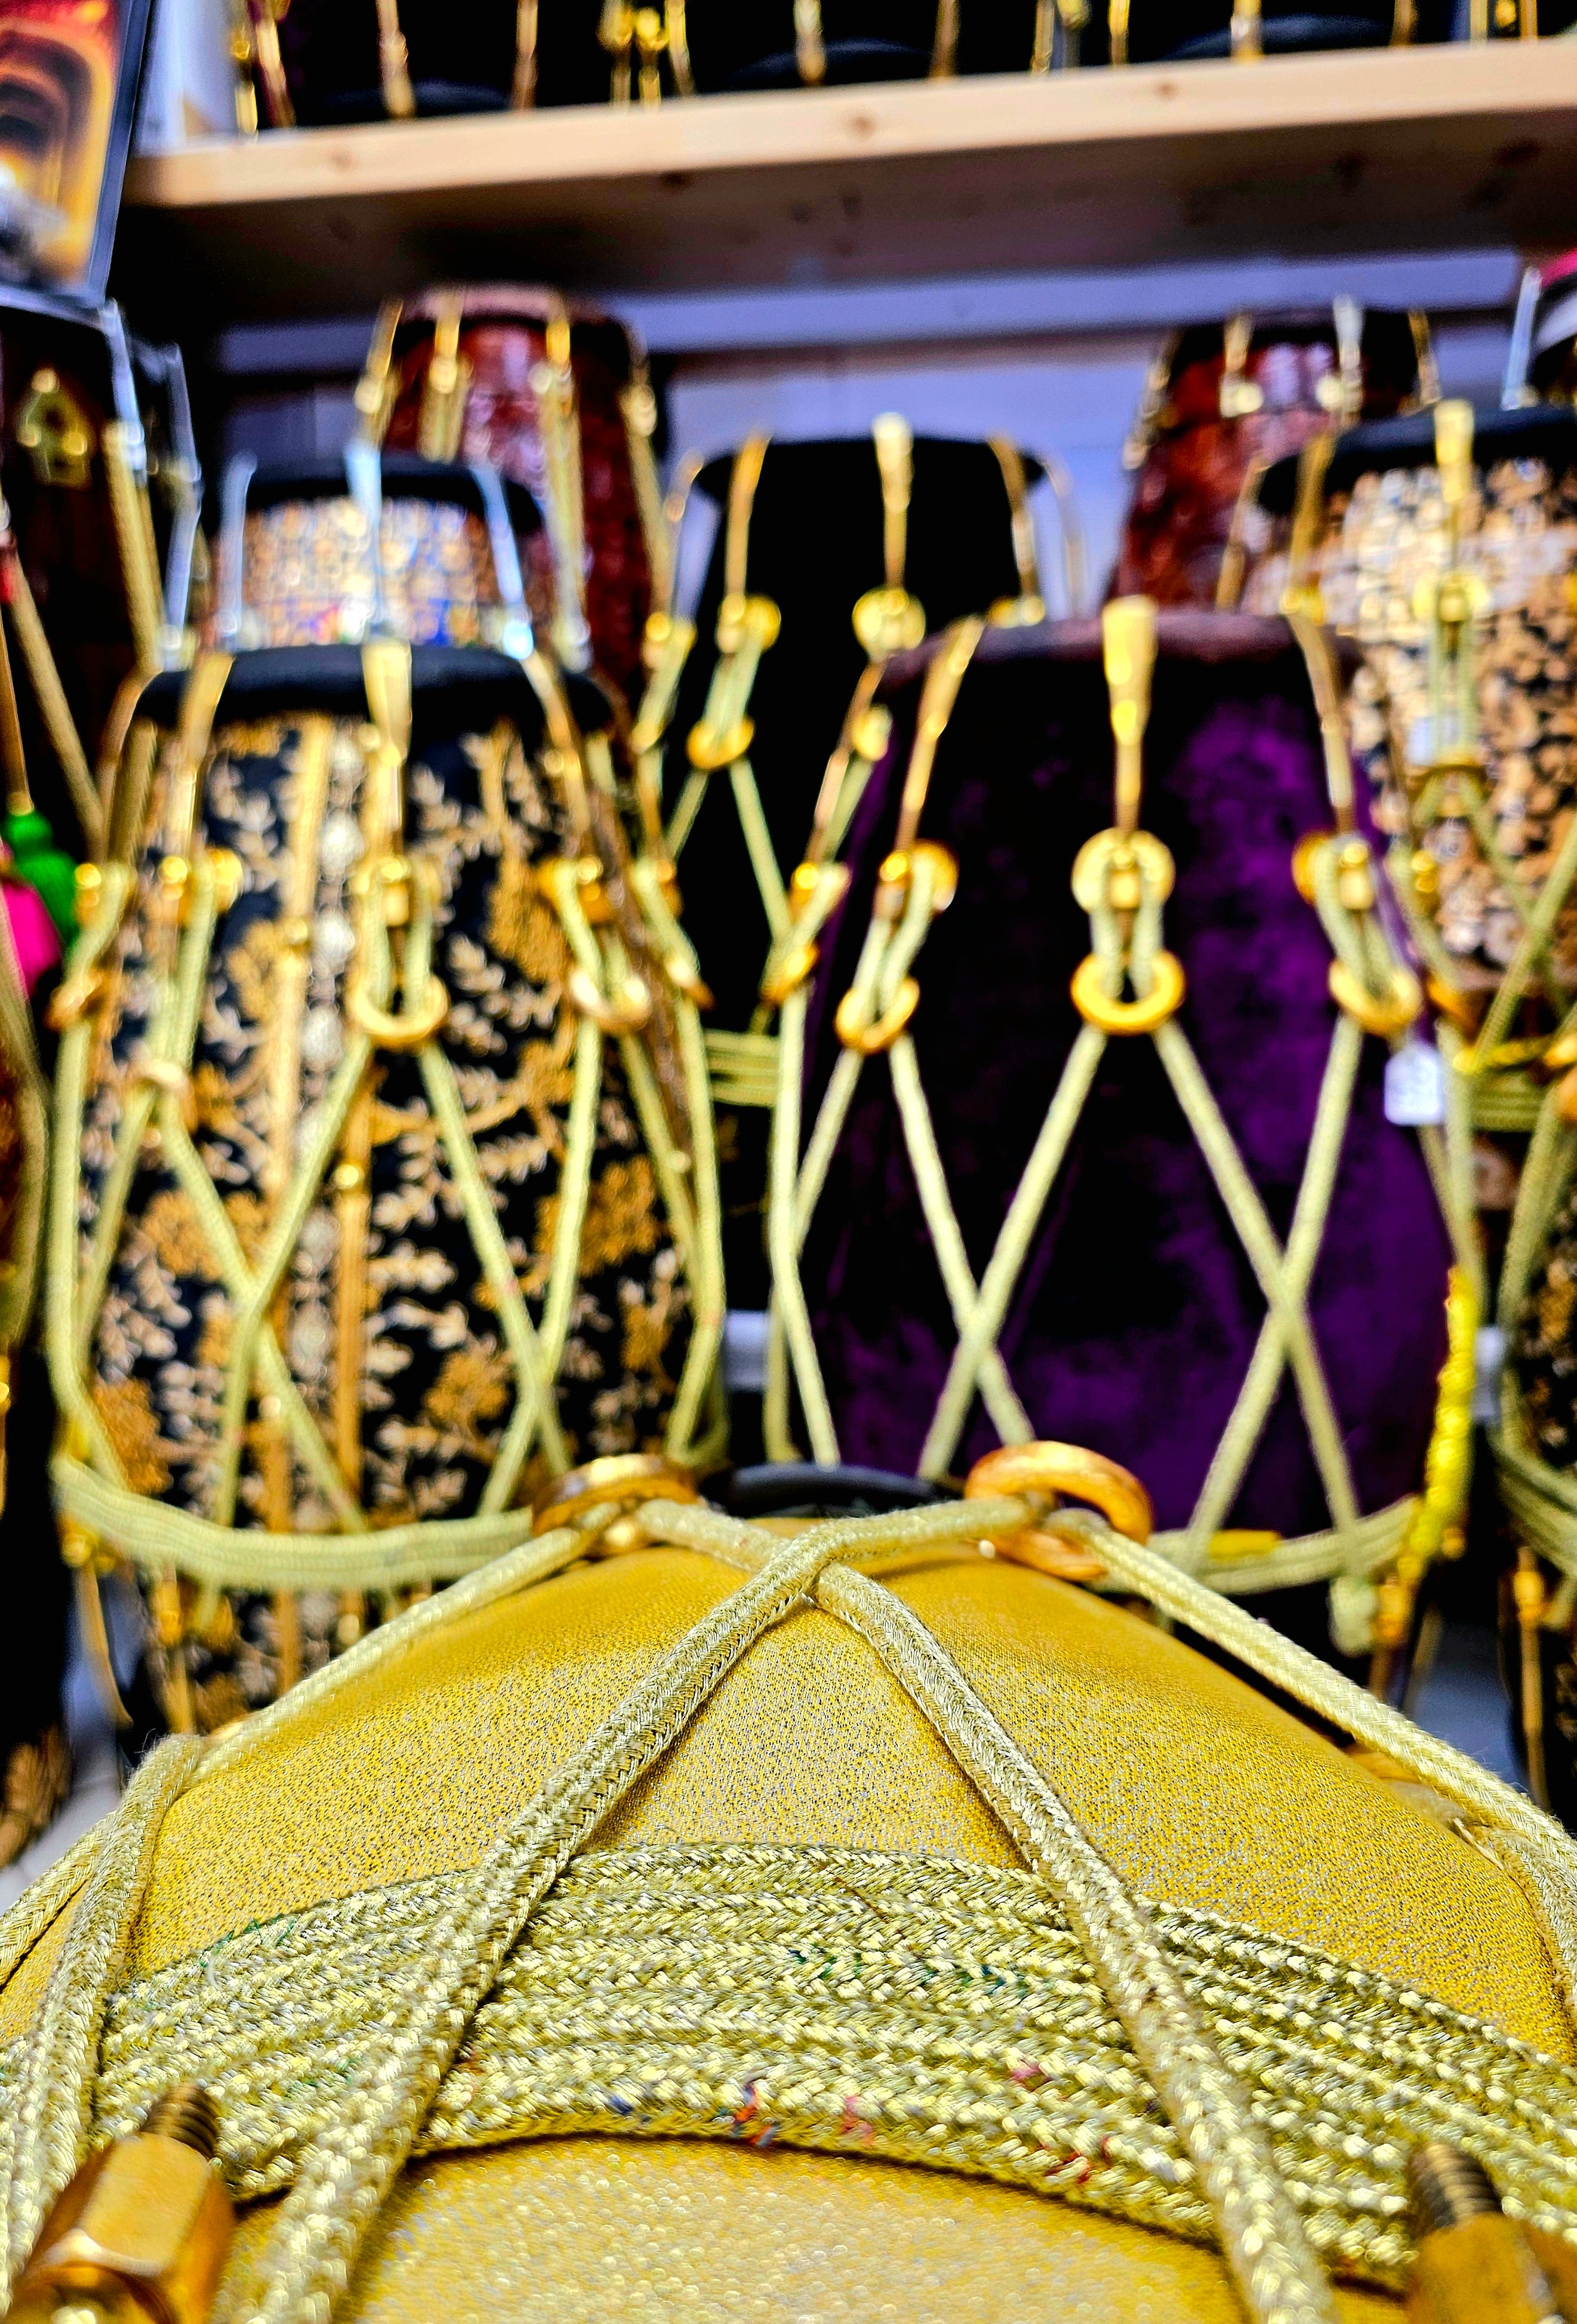 Radiant Rhythms: Golden Sparkly Wrapped Red Sheesham Dholak with Black Skins, Thin-Rimmed Treble Skin, and Golden Accents - *Slightly Imperfect Wrap